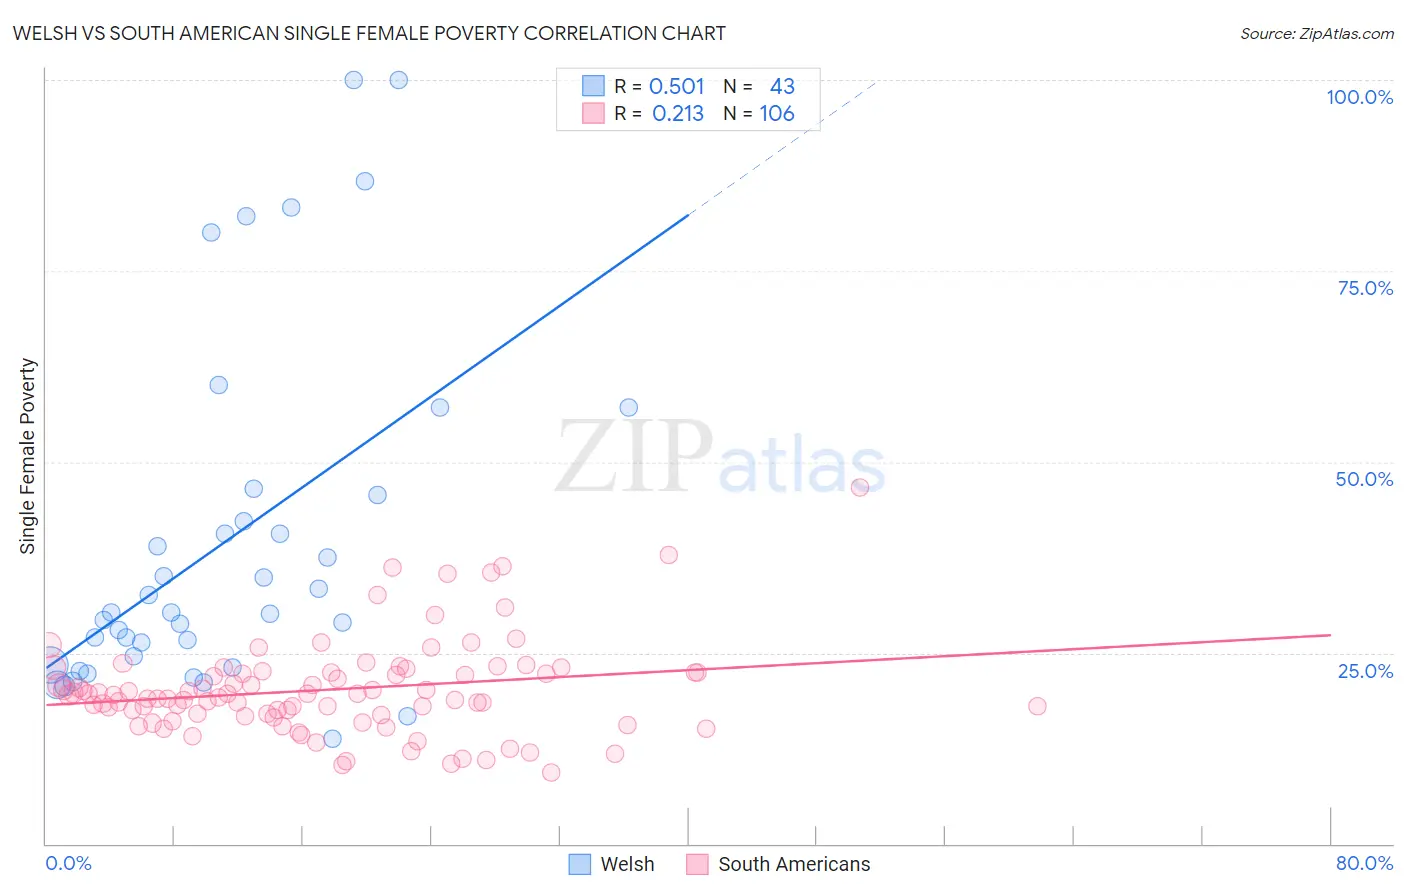 Welsh vs South American Single Female Poverty